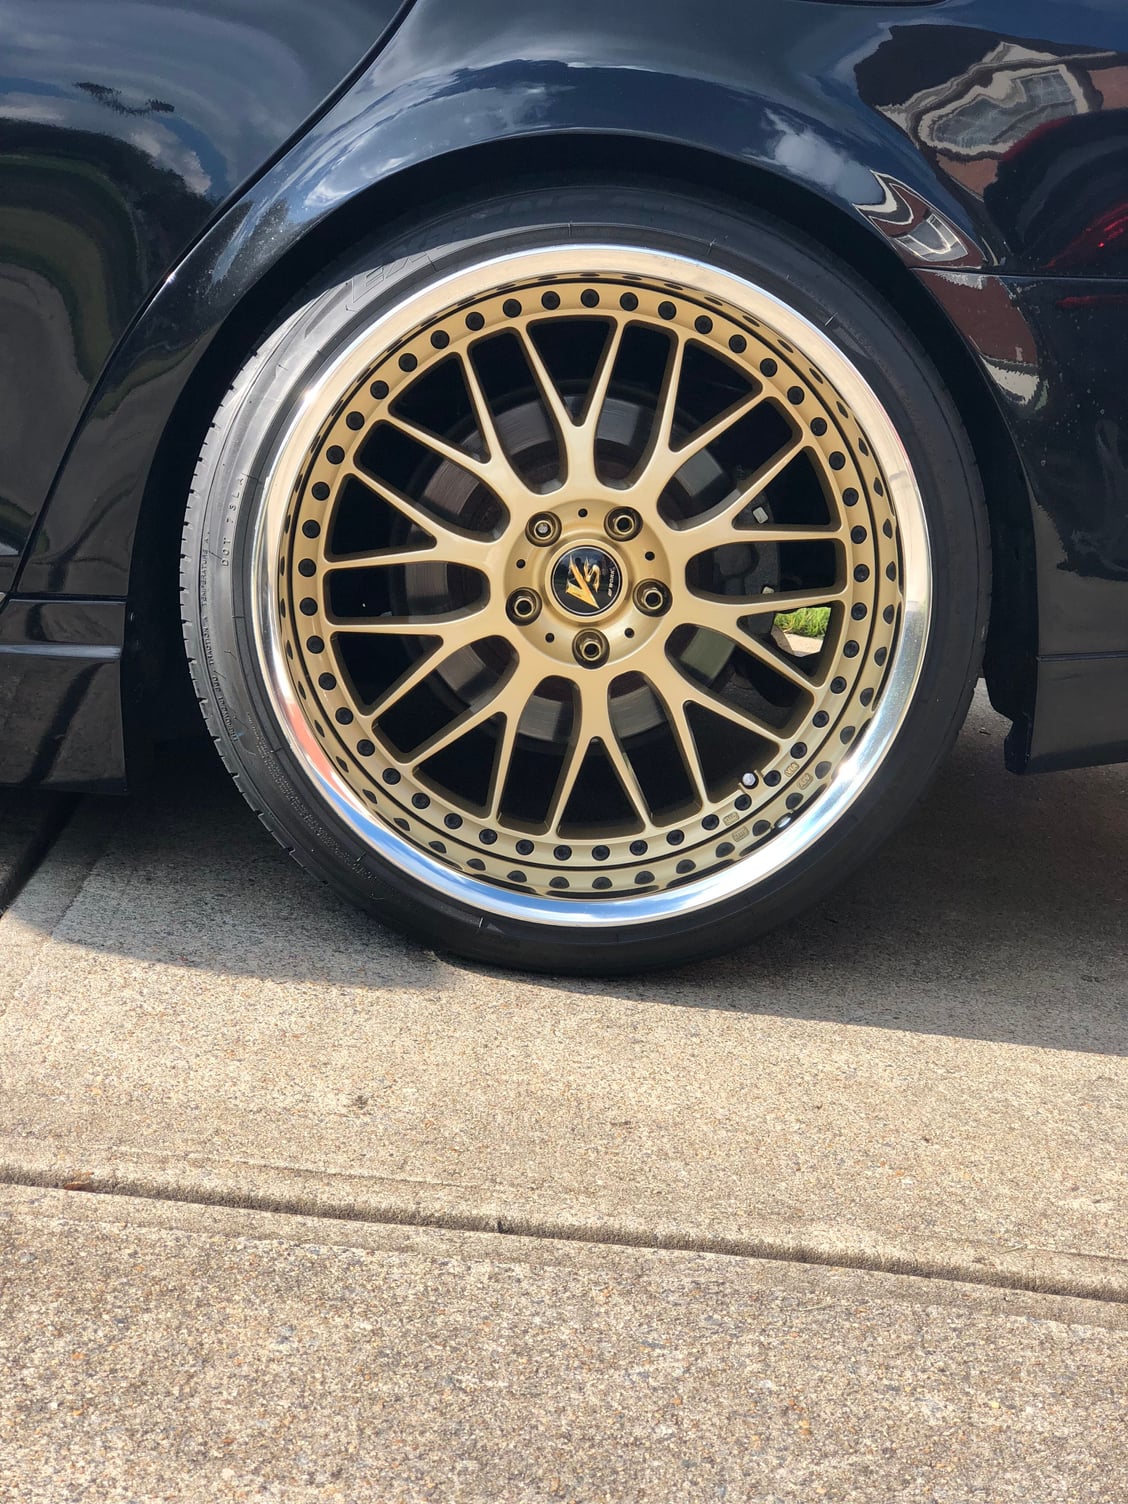 Wheels and Tires/Axles - Work Wheel VSXX Gold 20x9.5 -2 and 20x10.5 0 with good tires! BBK Friendly - Used - All Years Any Make All Models - Duluth, GA 30097, United States